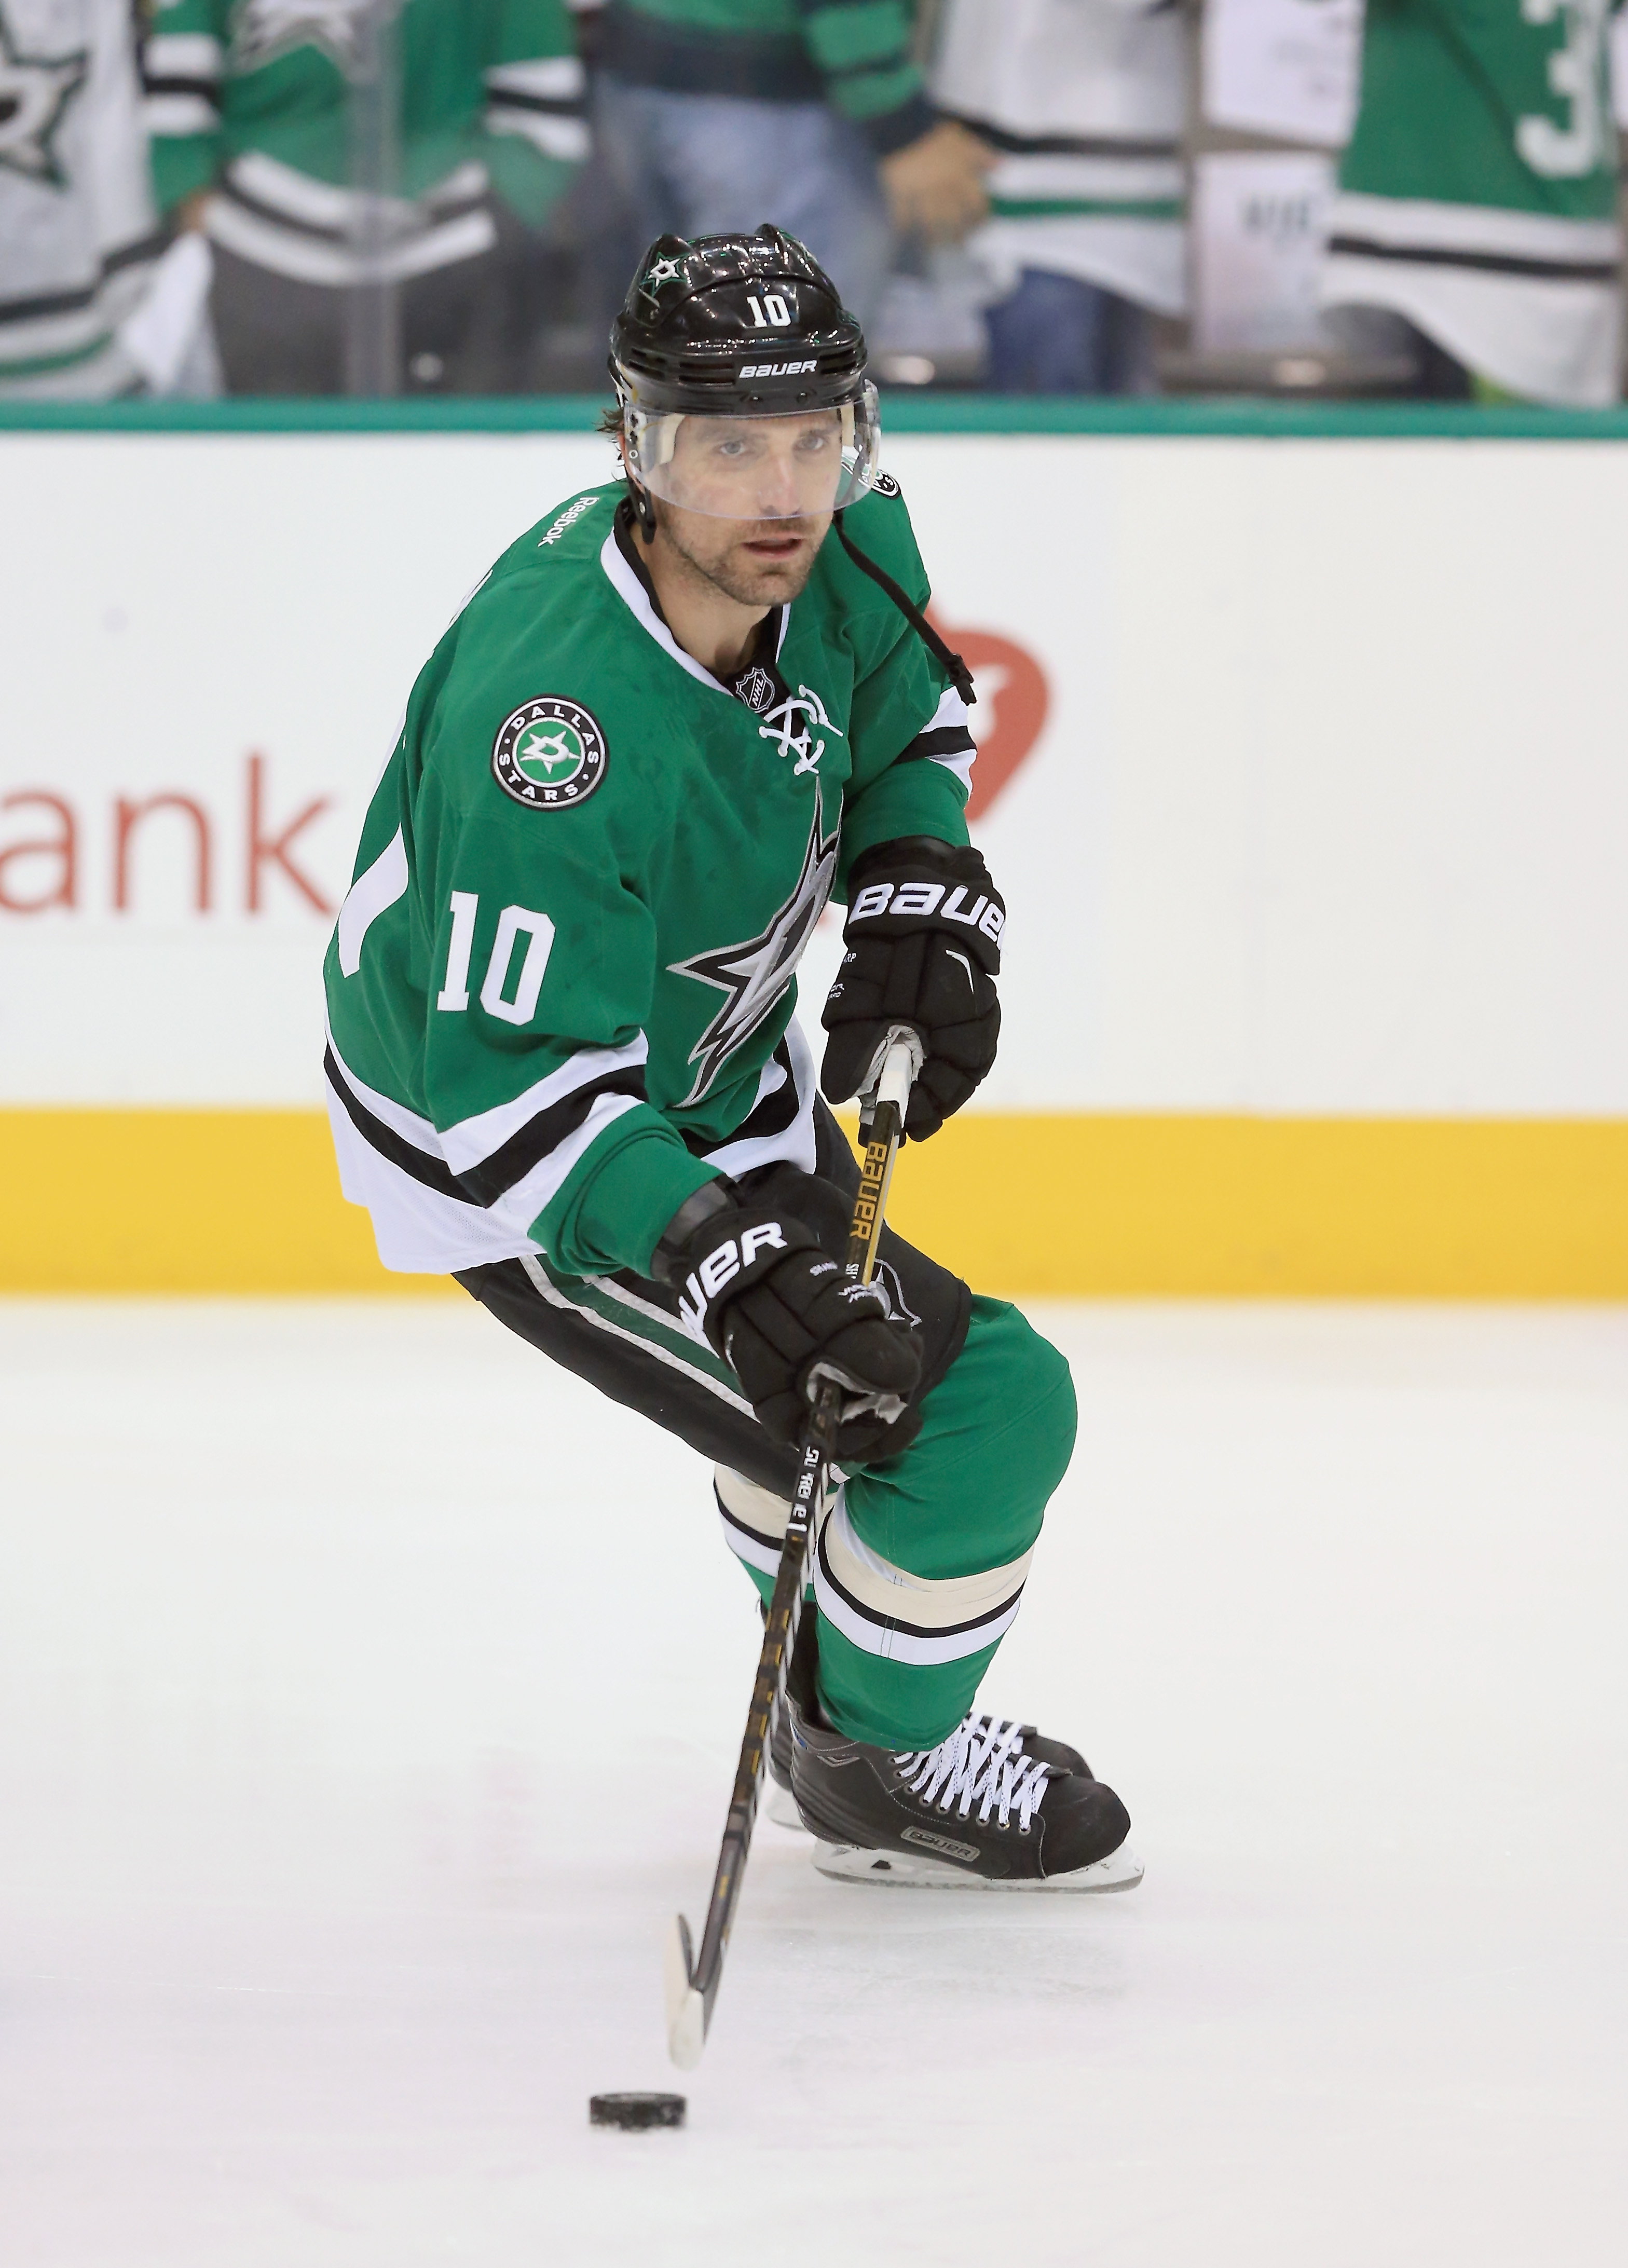 Patrick Sharp continues to contend with concussion issues